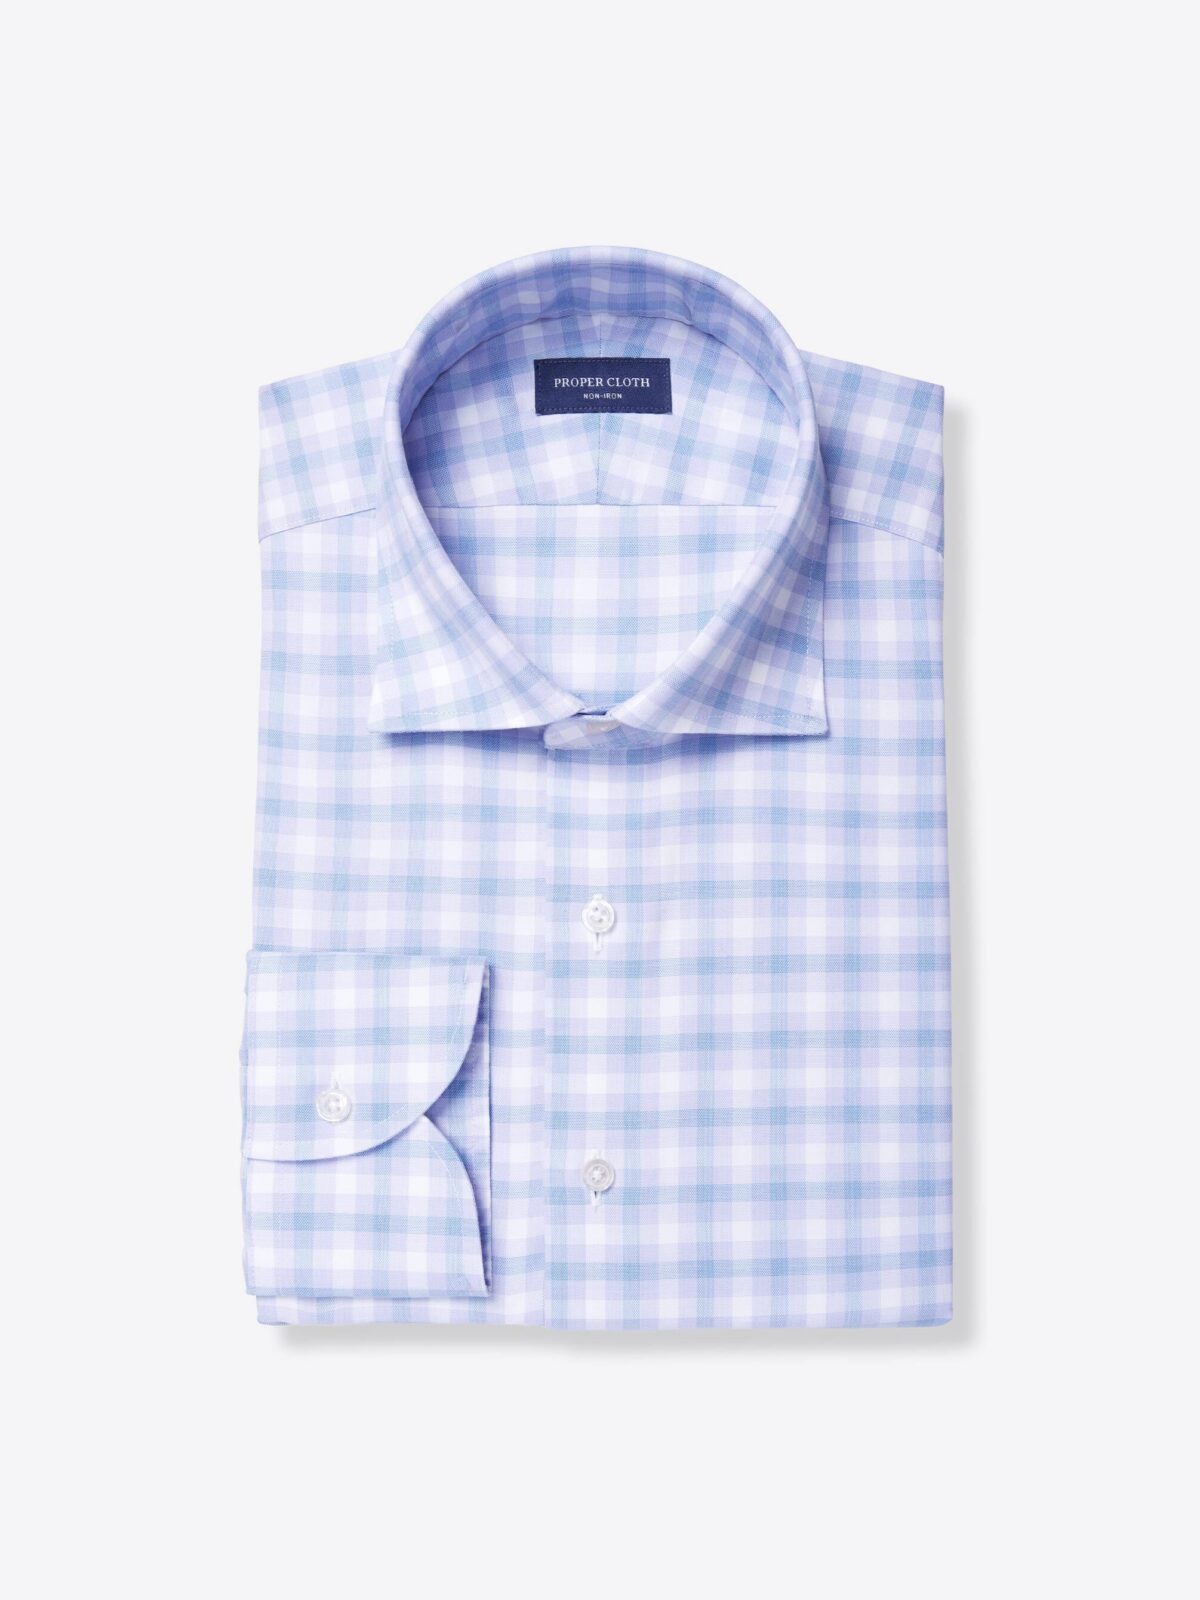 Non-Iron Stretch Lavender and Blue Check Shirt by Proper Cloth